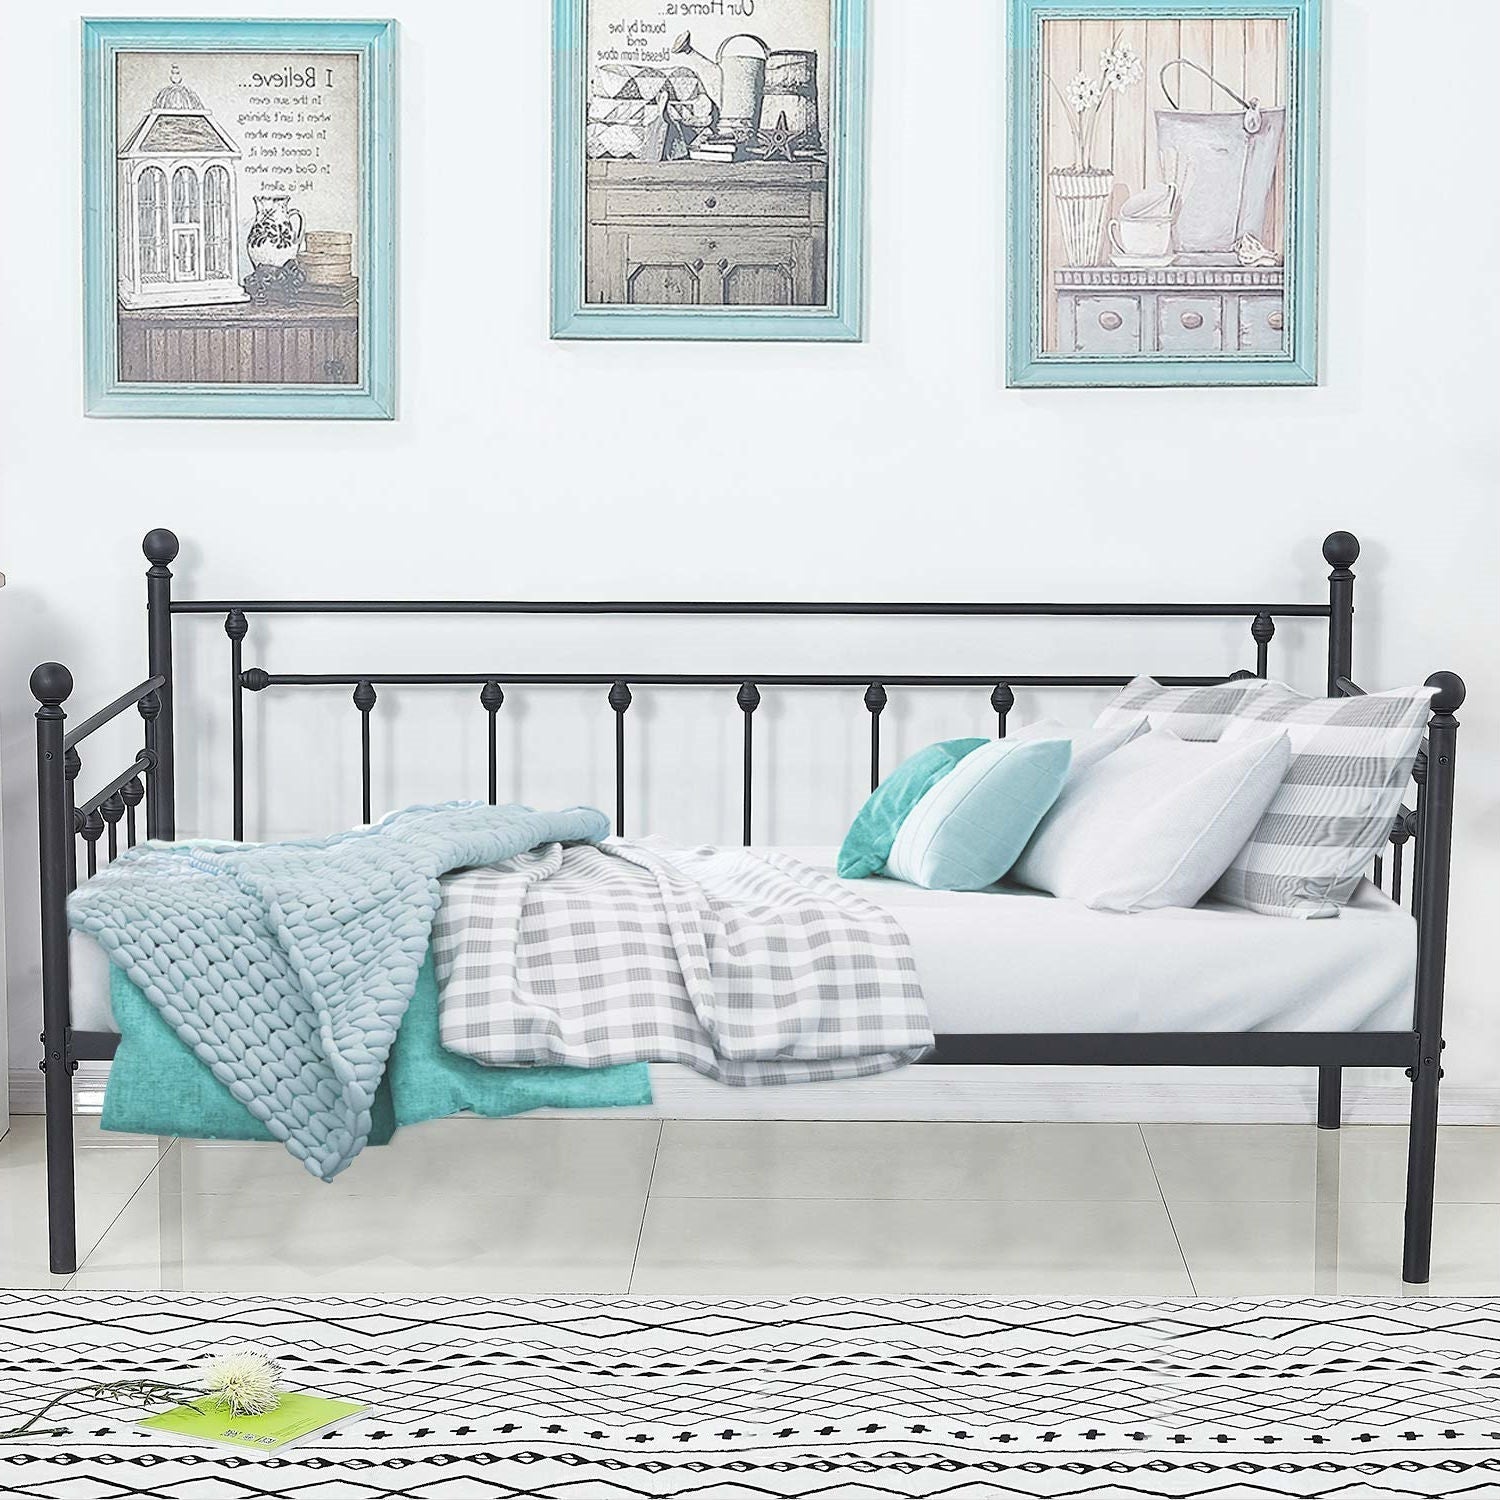 Bedroom > Bed Frames > Daybeds - Twin Size Classic Black Metal Daybed Frame